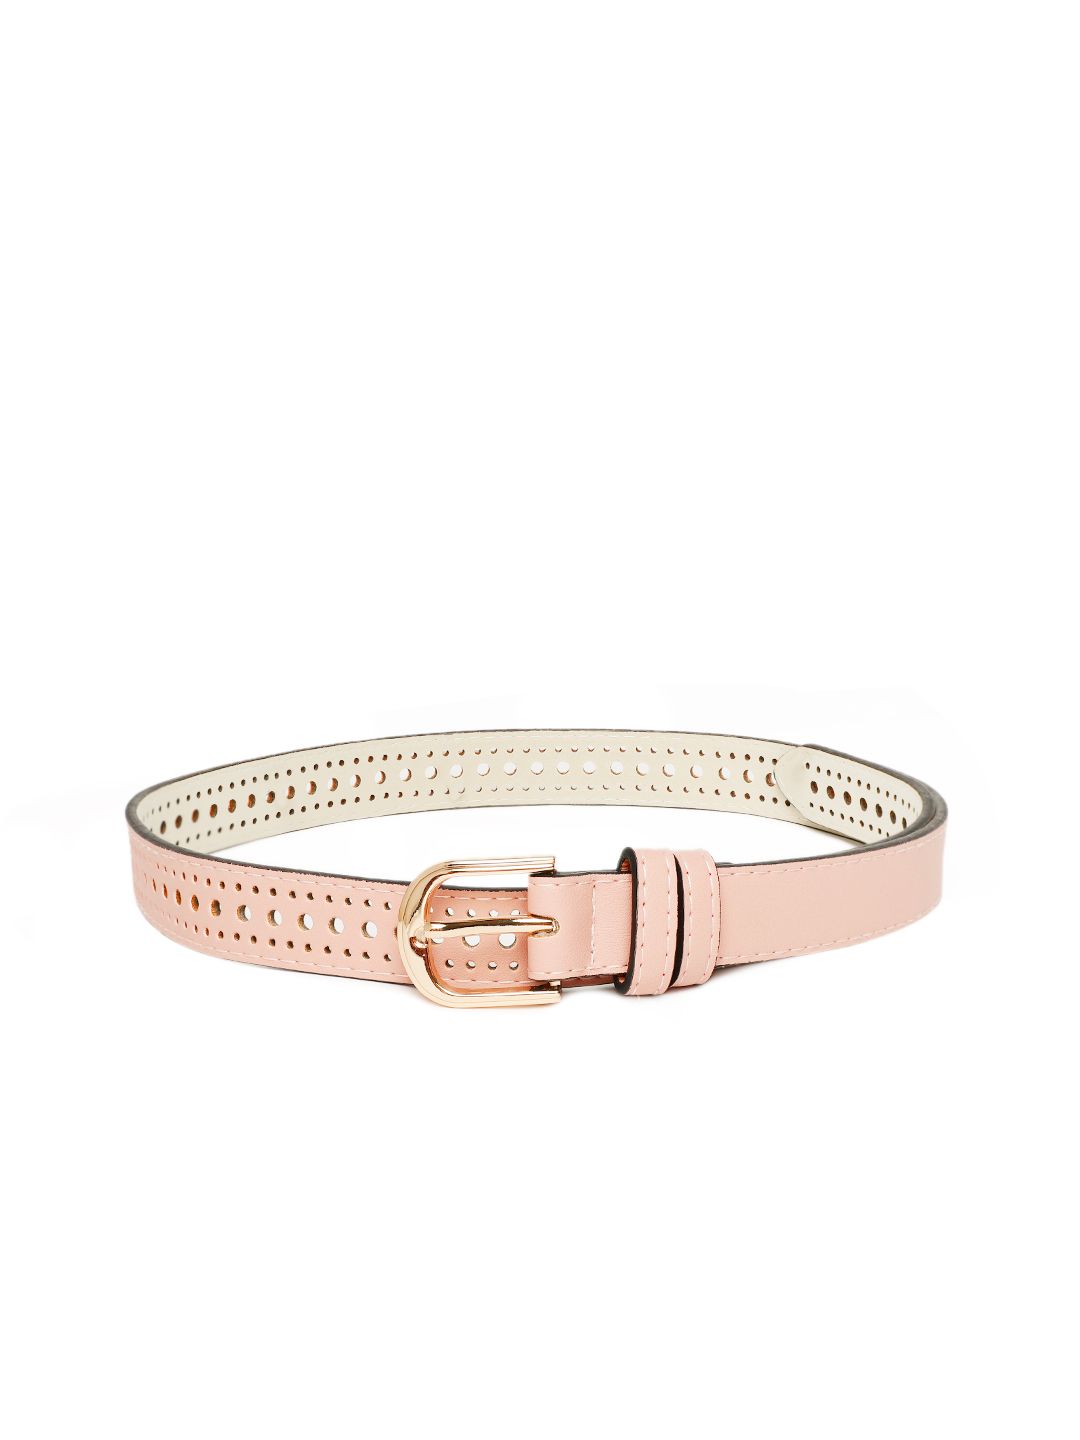 Mast & Harbour Women Pink Cut Out Belt Price in India